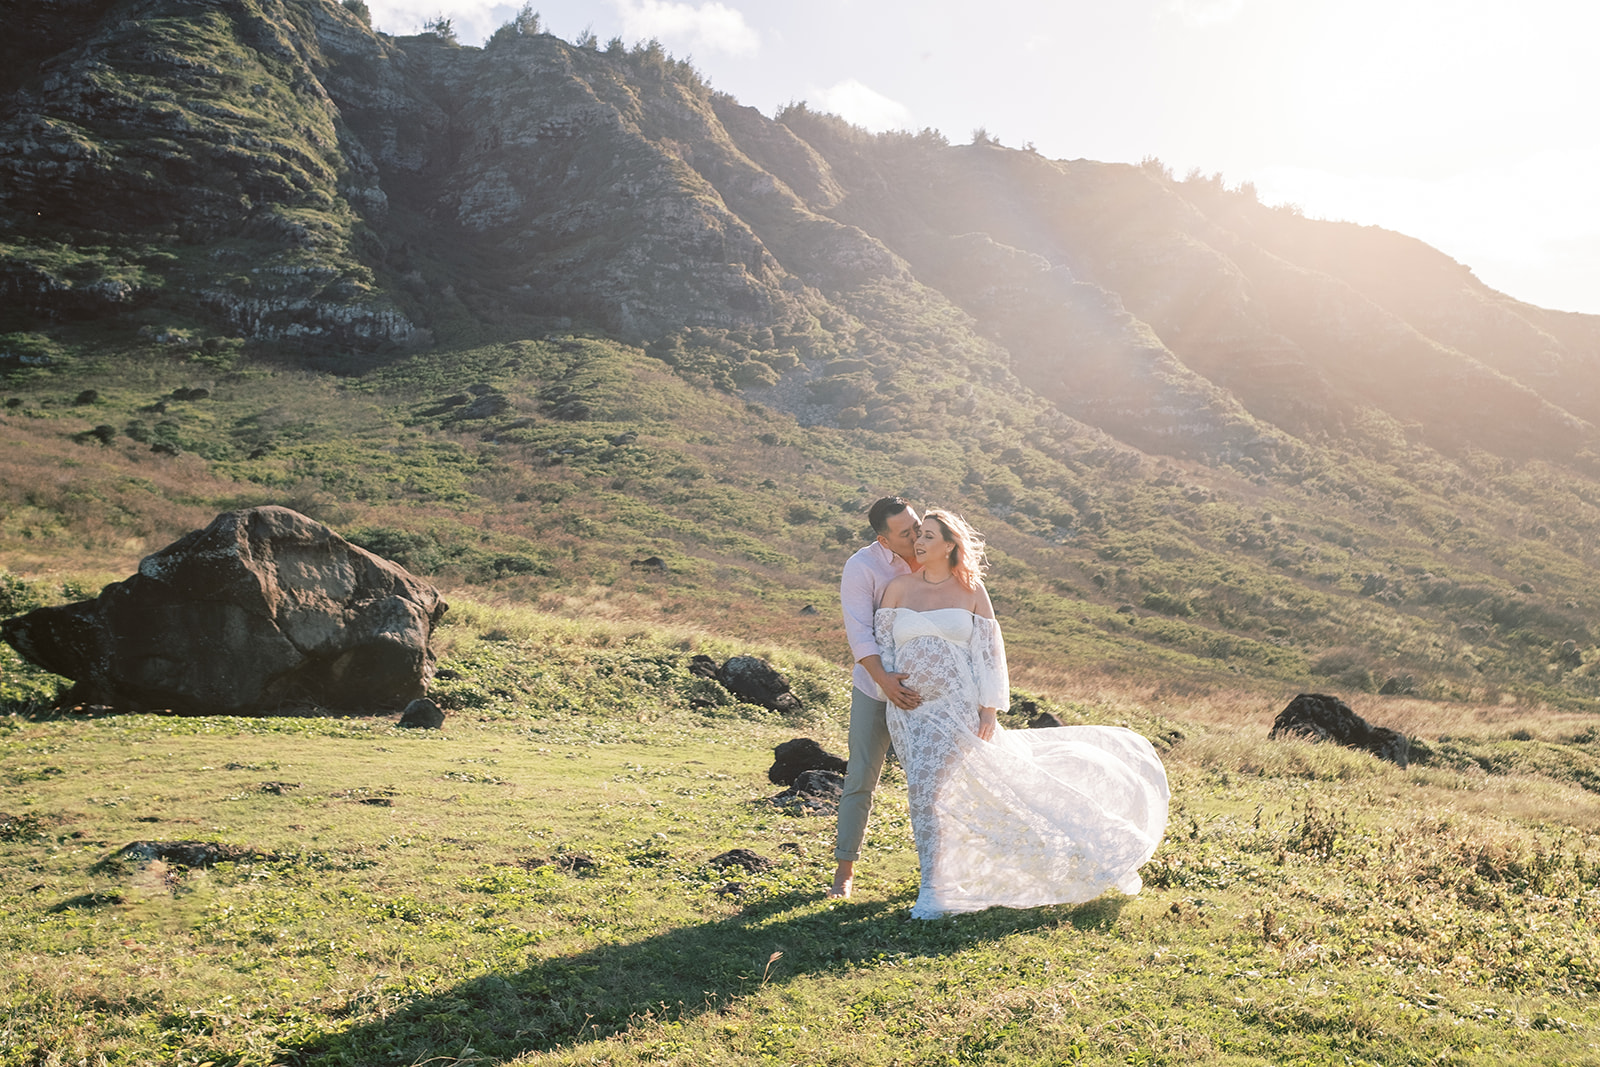 A couple in wedding attire sharing a kiss in a sunlit field with mountains, captured by an Oahu photographer.